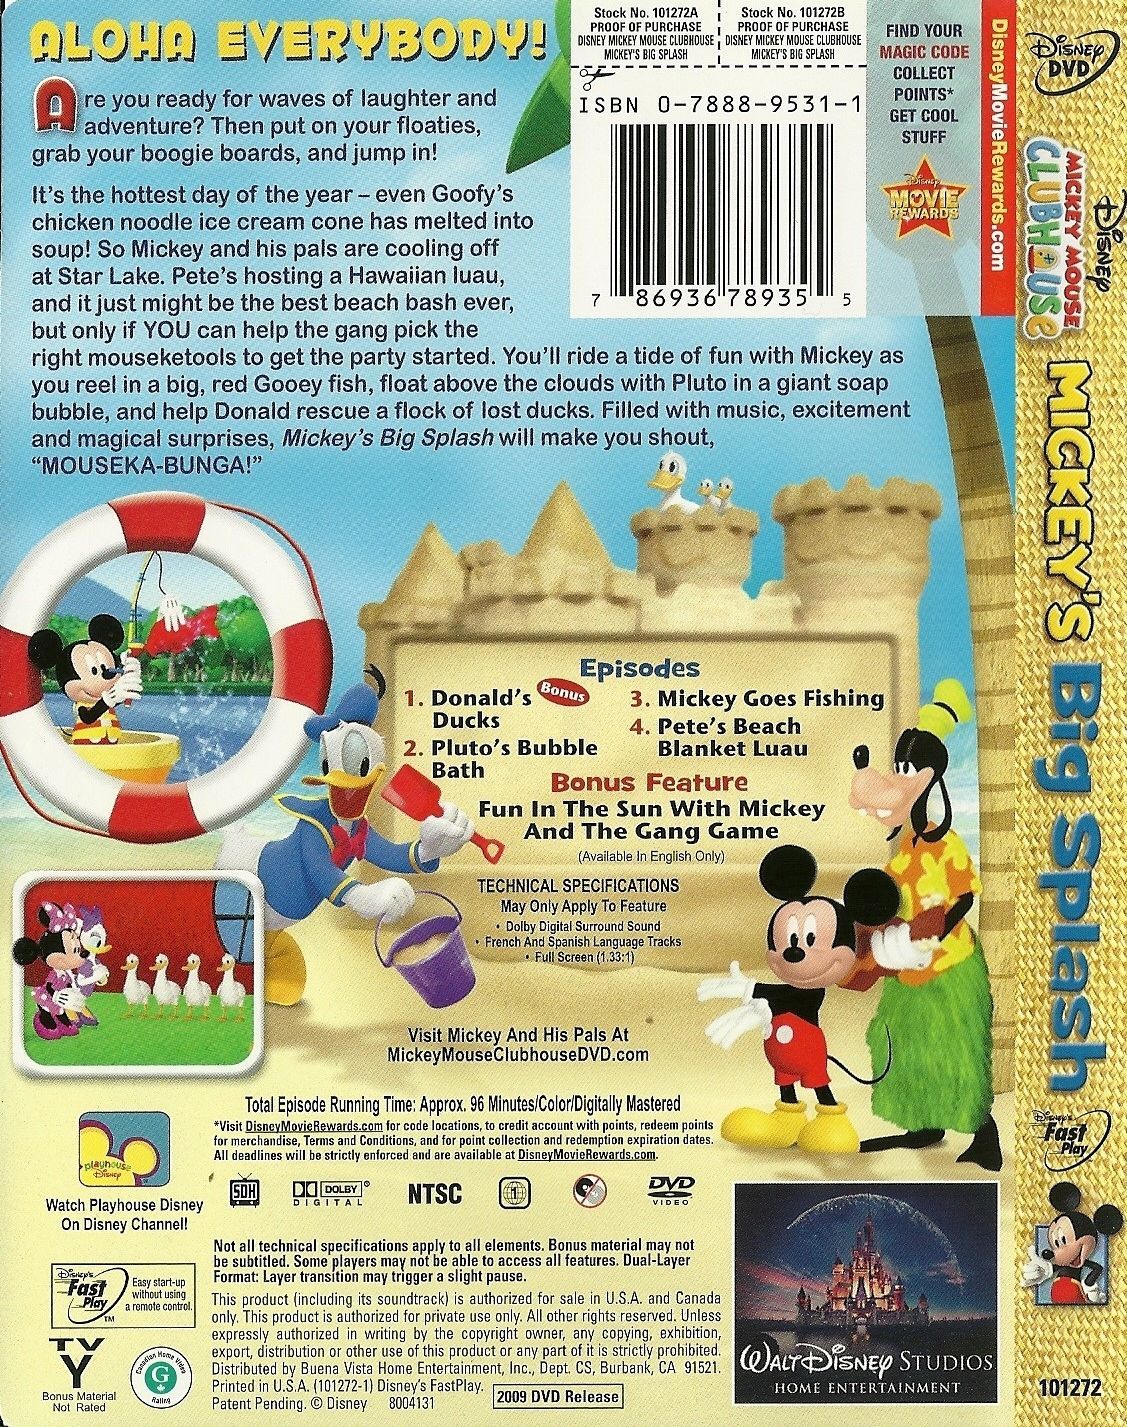 Mickeys Big Splash Dvd Disney Mickey Mouse Clubhouse Dvds And Blu Ray